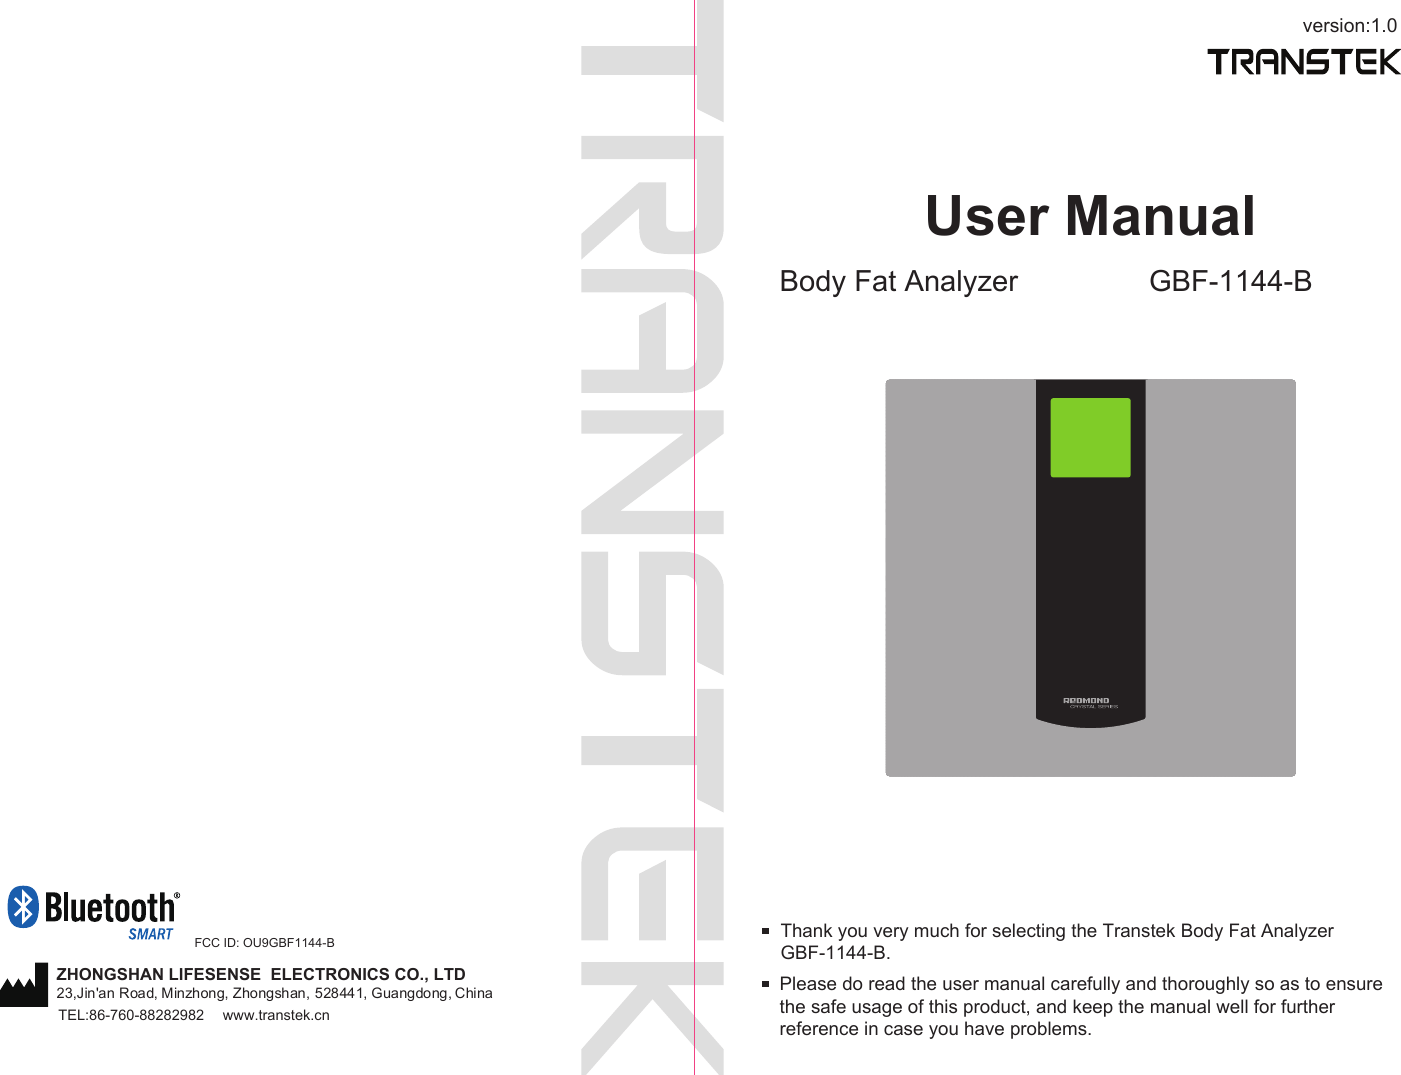 version:1.0User ManualBody Fat Analyzer GBF-1144-BPlease do read the user manual carefully and thoroughly so as to ensure the safe usage of this product, and keep the manual well for further reference in case you have problems.Thank you very much for selecting the Transtek Body Fat Analyzer GBF-1144-B. TEL:86-760-88282982  www.transtek.cnZHONGSHAN LIFESENSE  ELECTRONICS CO., LTD23,Jin&apos;an Road, Minzhong, Zhongshan, 528441, Guangdong, China FCC ID: OU9GBF1144-B